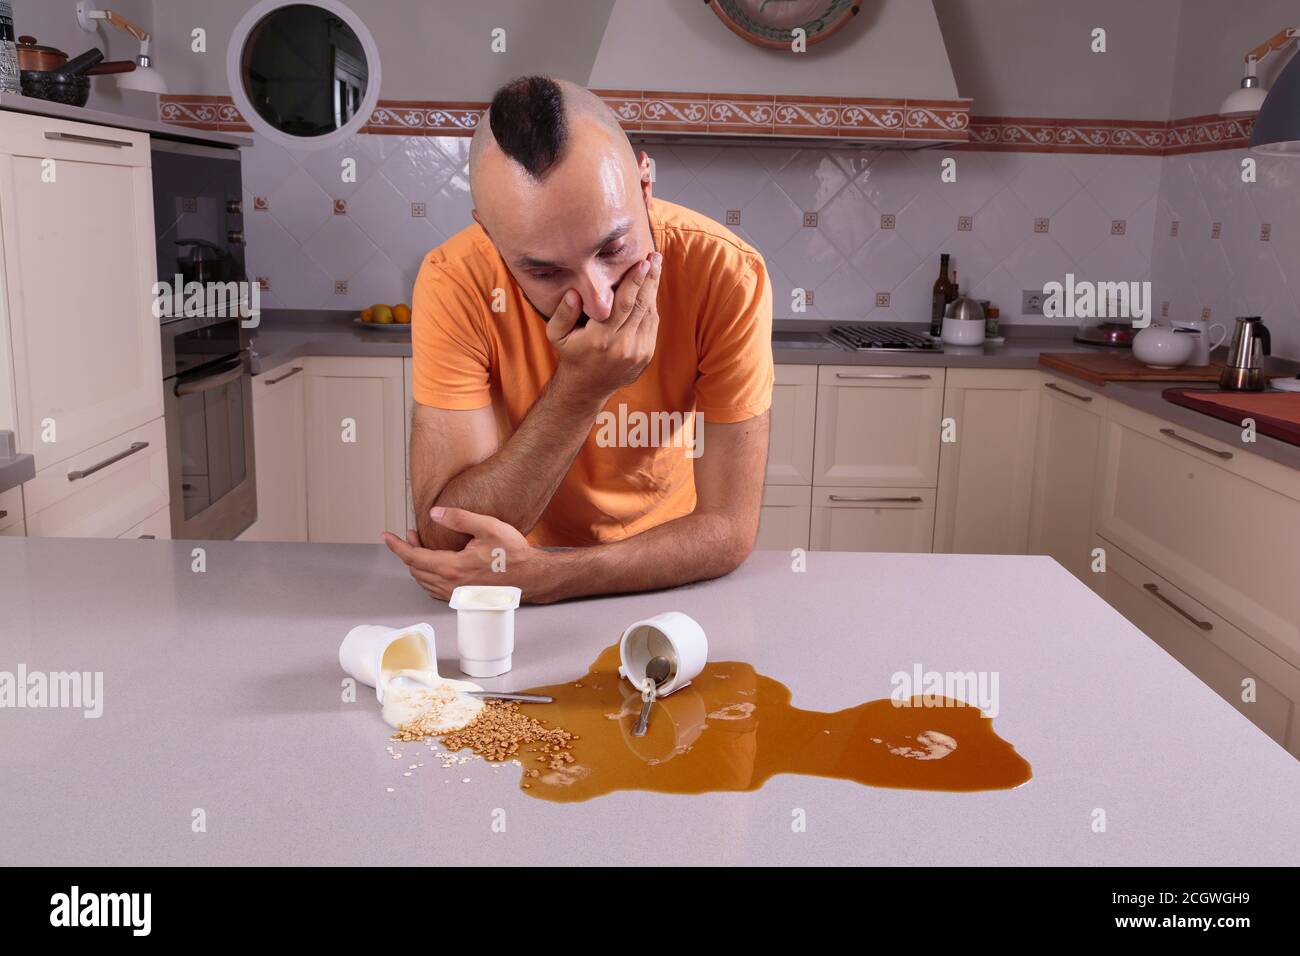 Young man looking with guilt at a mess on the counter Stock Photo